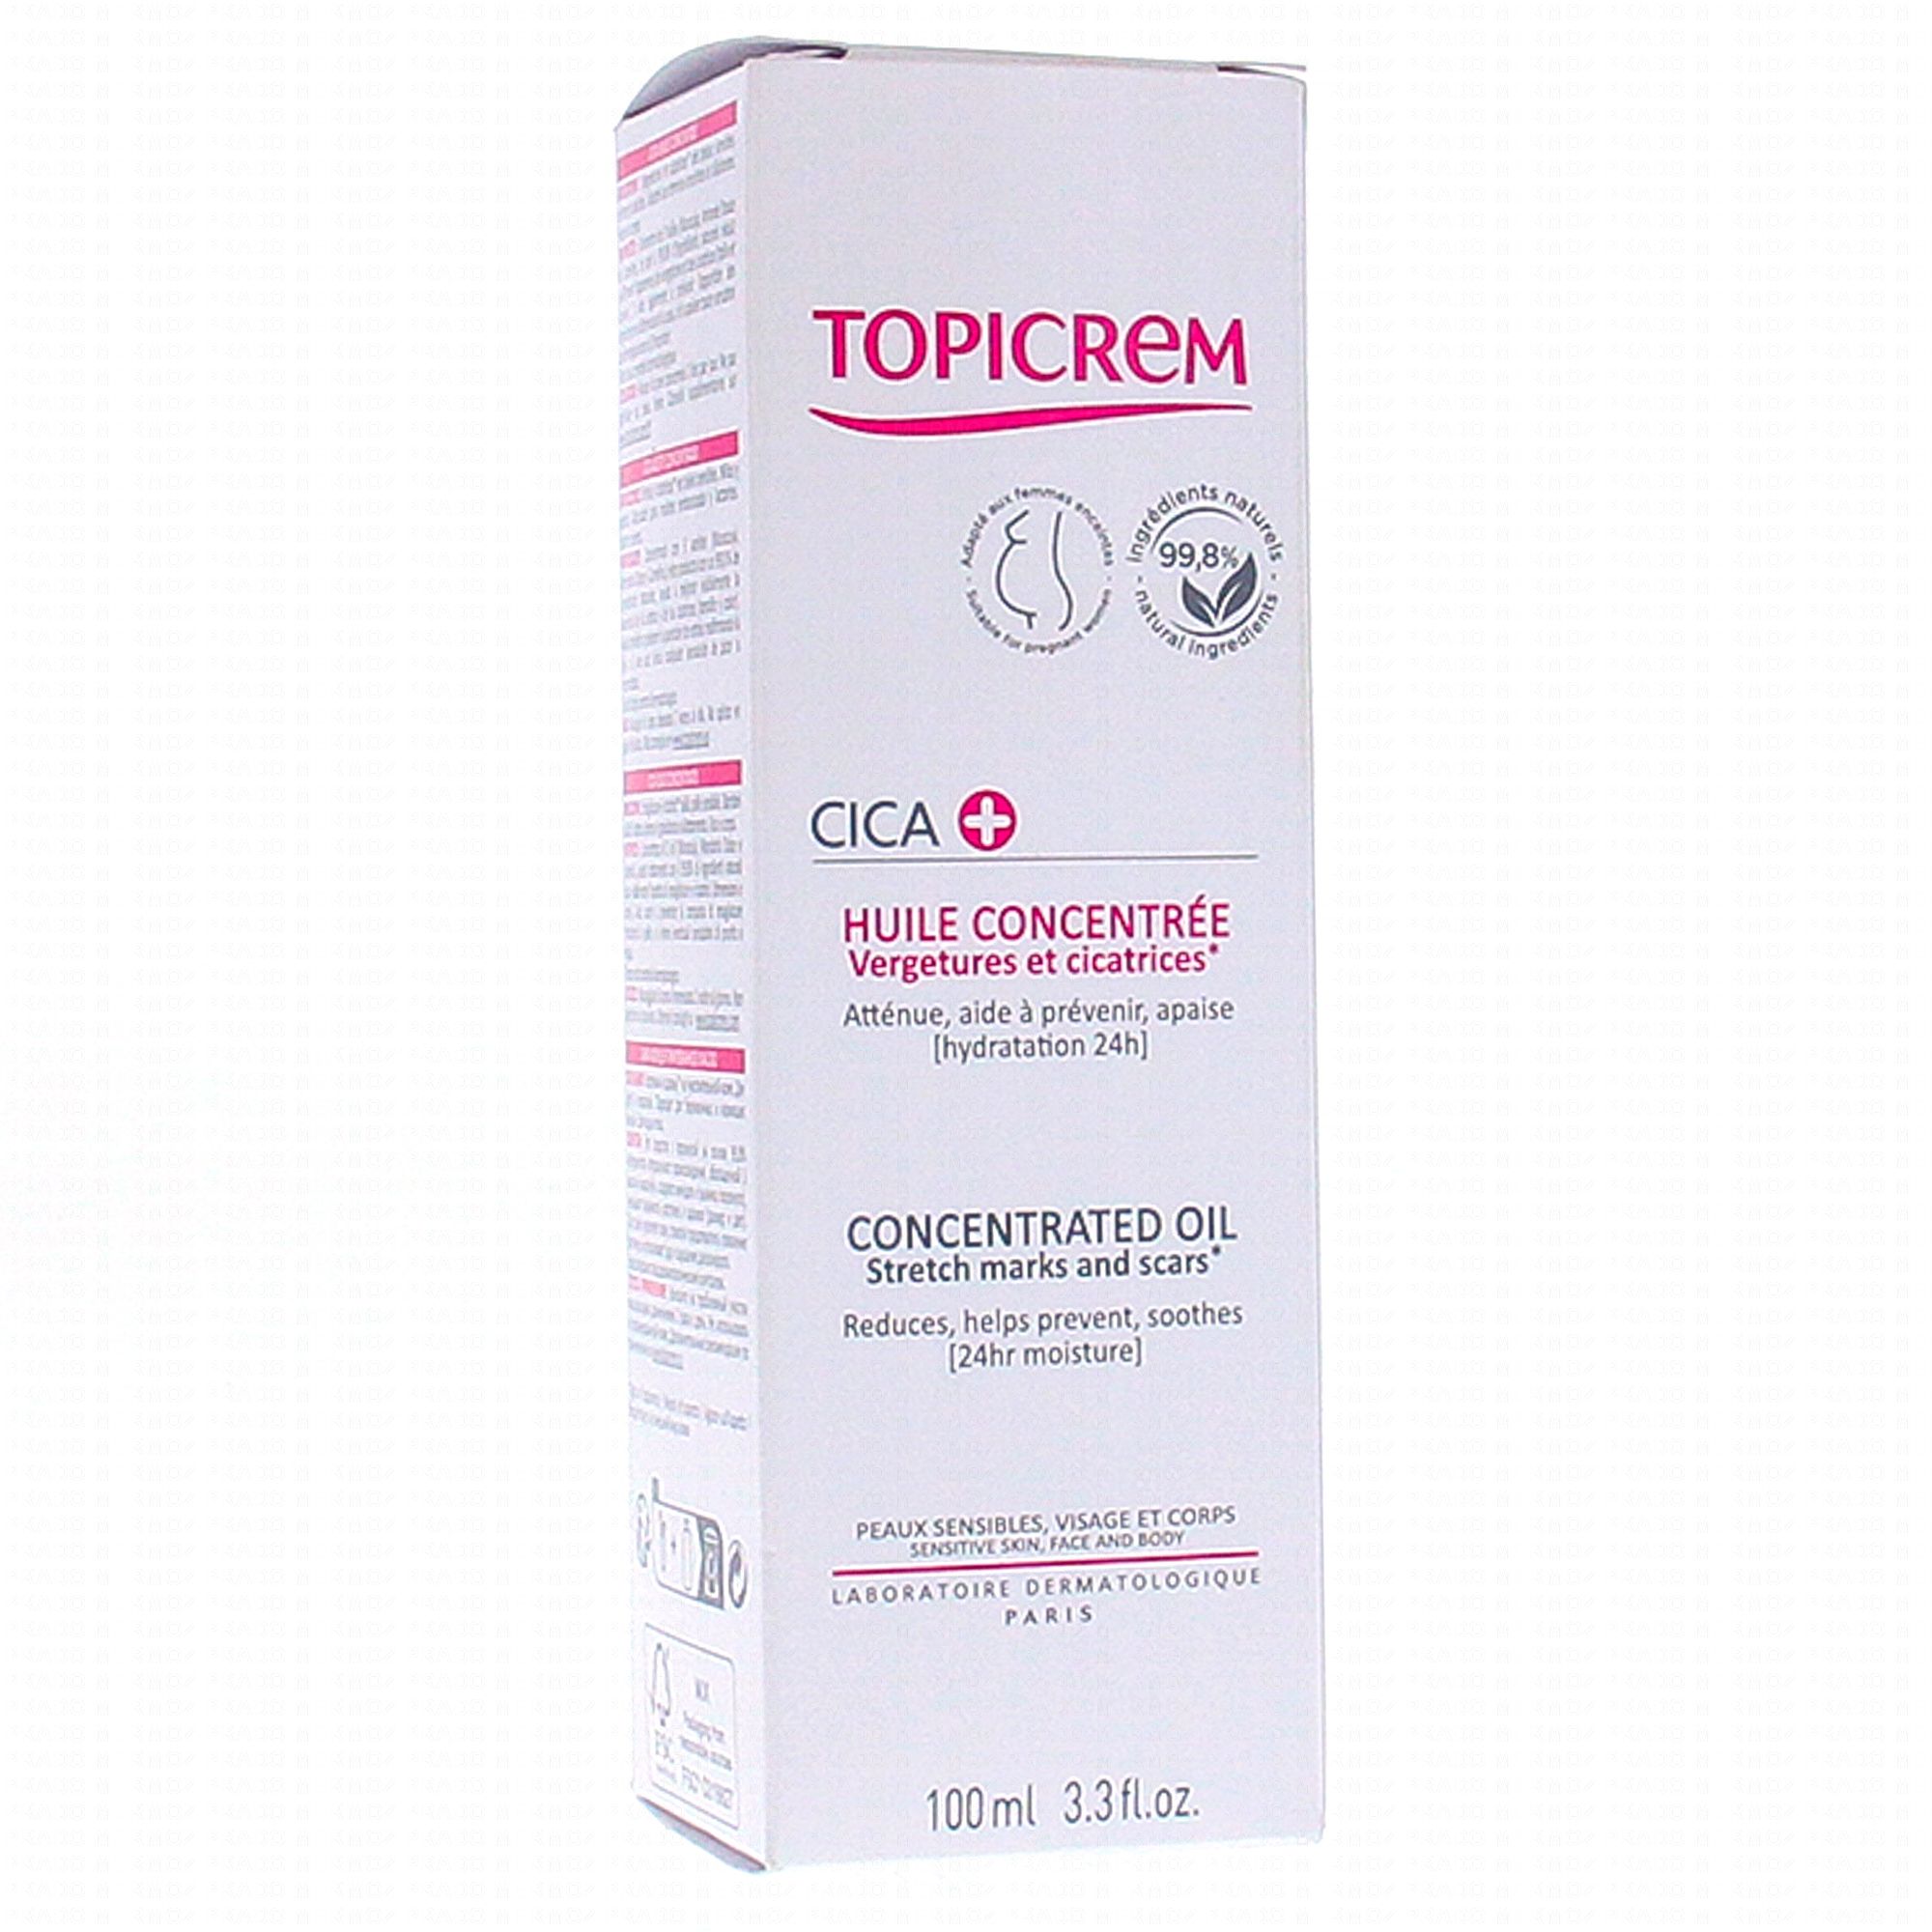 TOPICREM® CICA Concentrated OIL Stretch Marks and Scars.